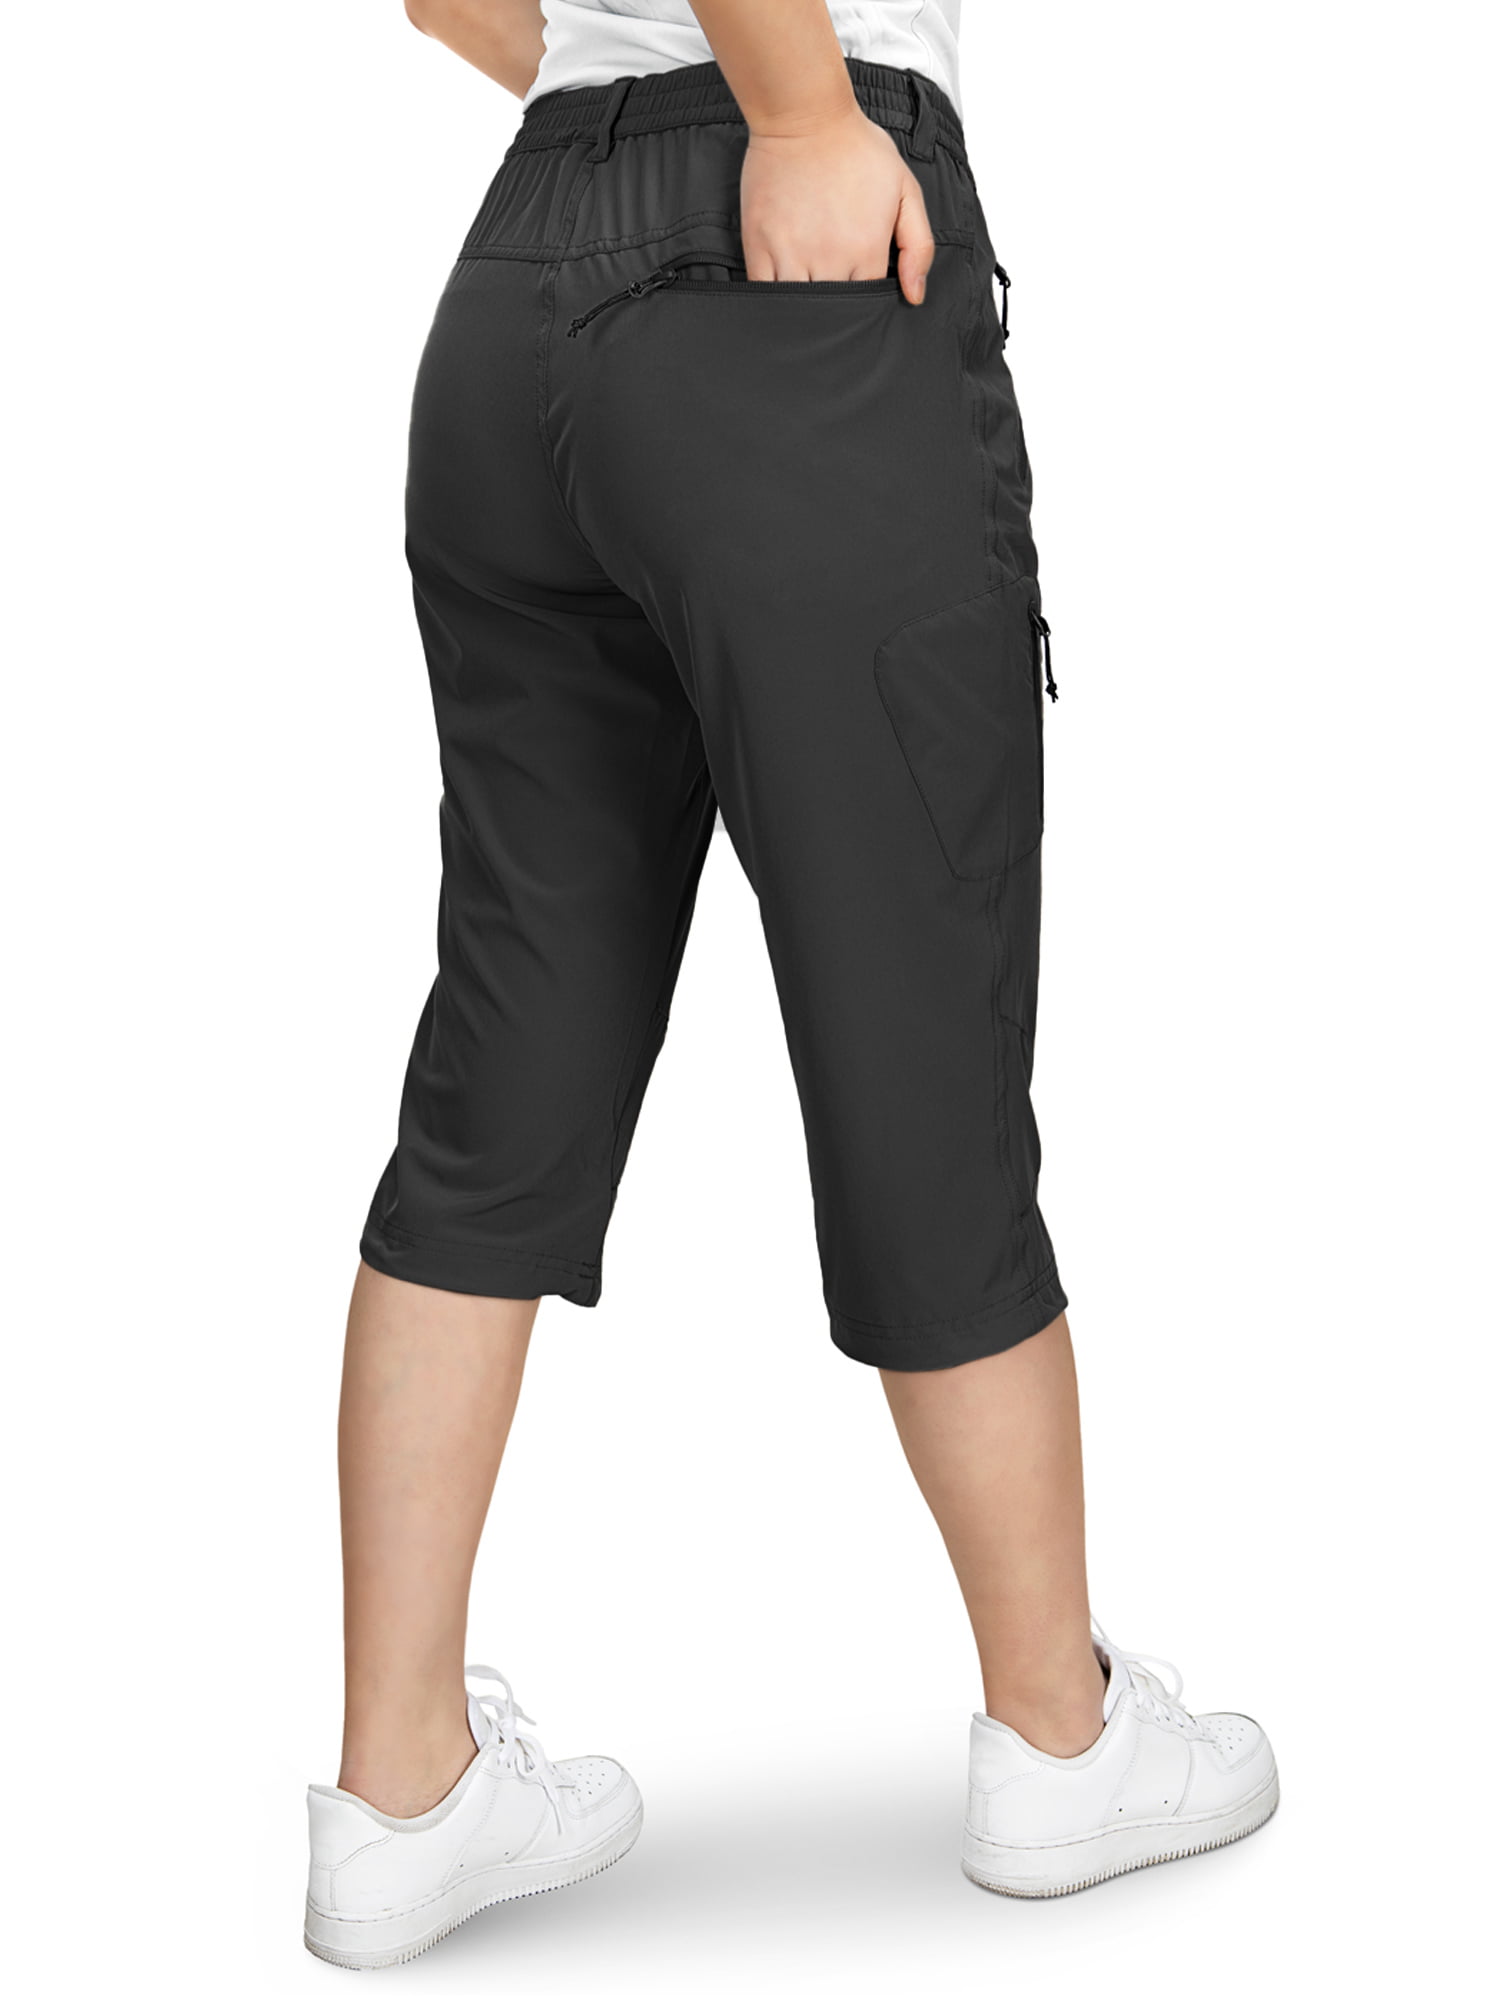 33,000ft Women's Capri Golf Pants Casual Quick Dry UPF 50+ Lightweight  Stretch Cargo Hiking Pants with Pockets Black 12 